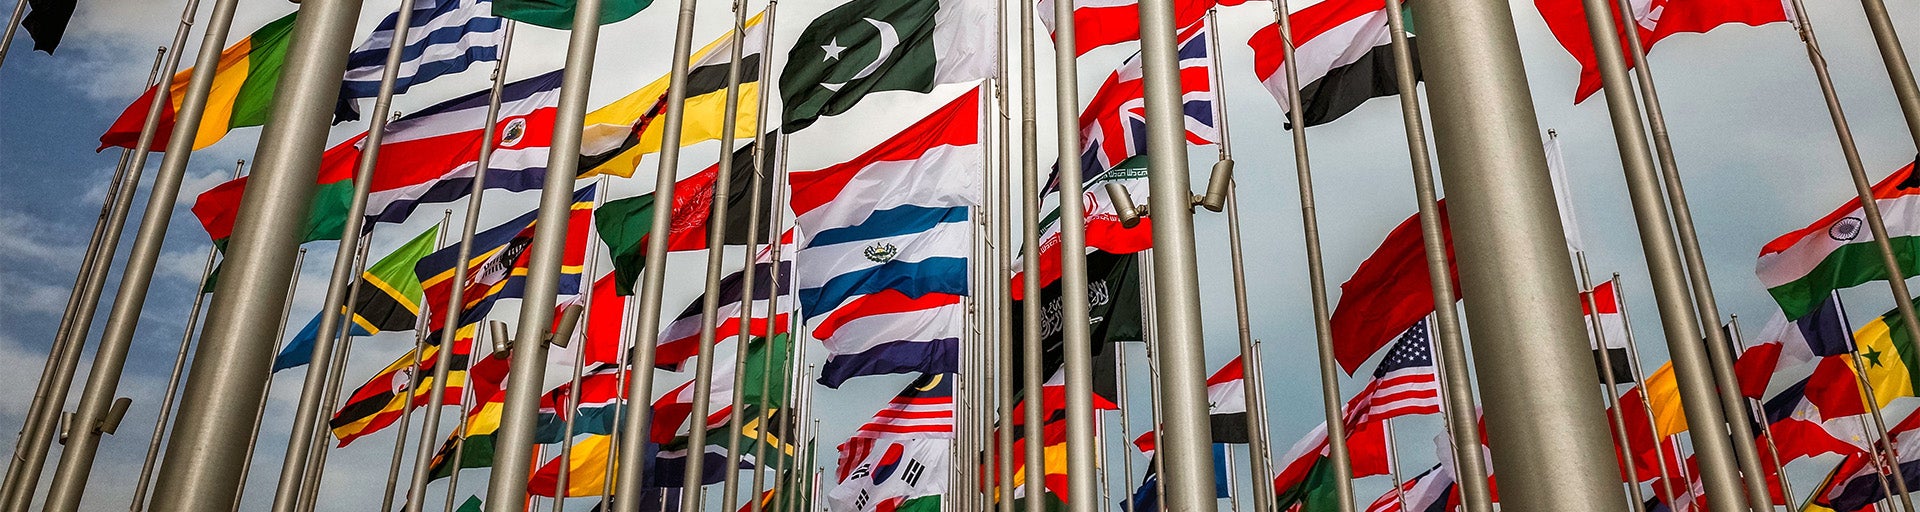 Country flags on polls in front of the United Nations.